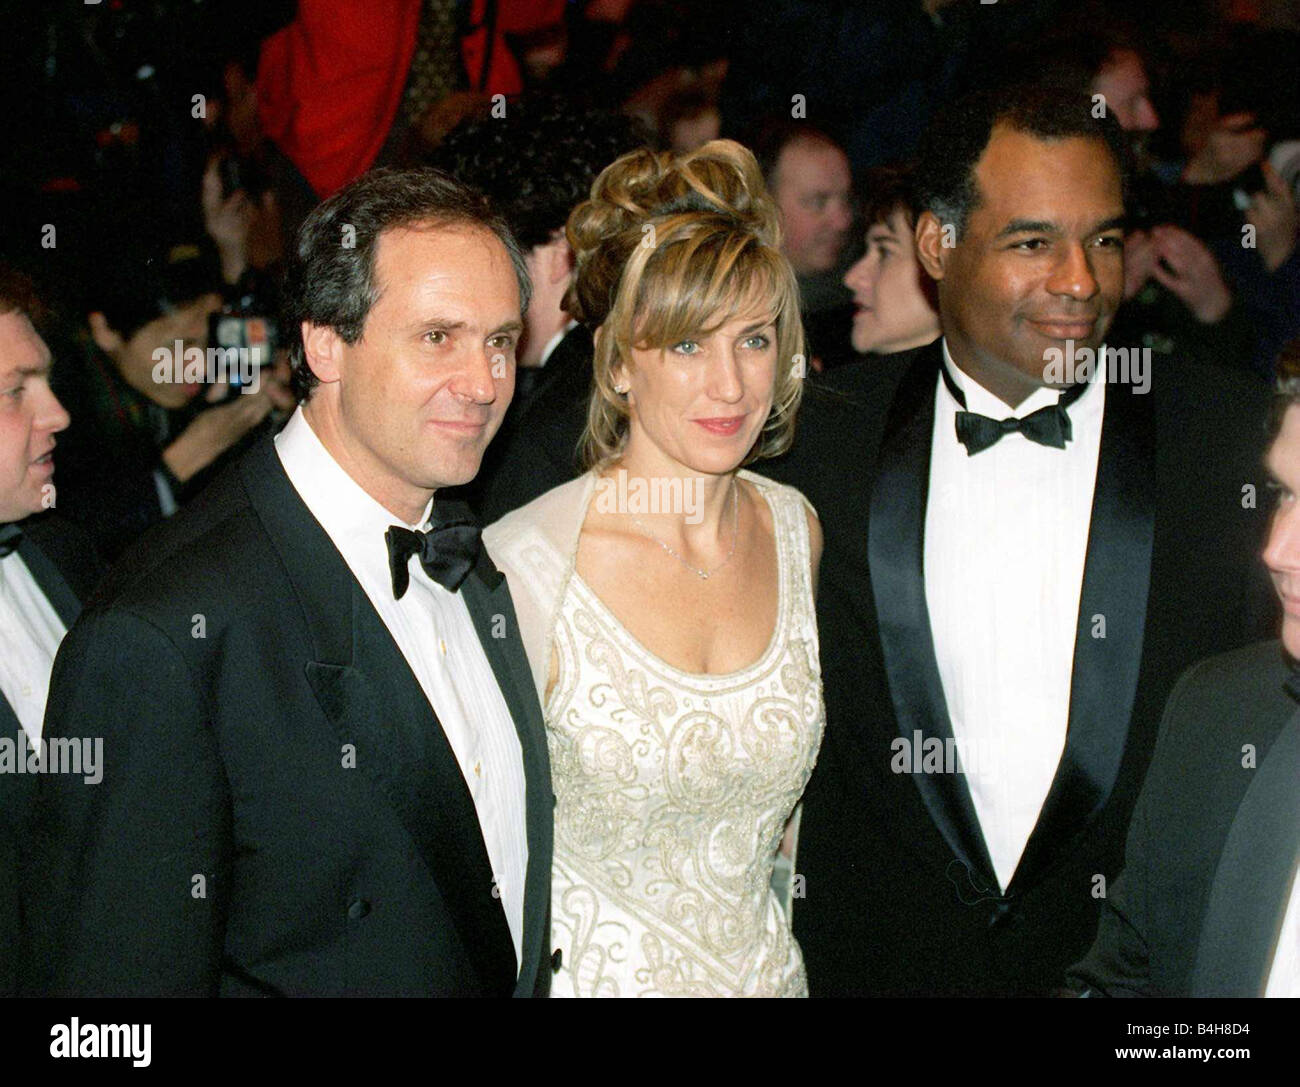 Michael Dorn Actor who plays Lieutenant Commander Worf in the new film Star Trek First Contact on the right with his guests at the premiere of the film at Leicester Square Stock Photo